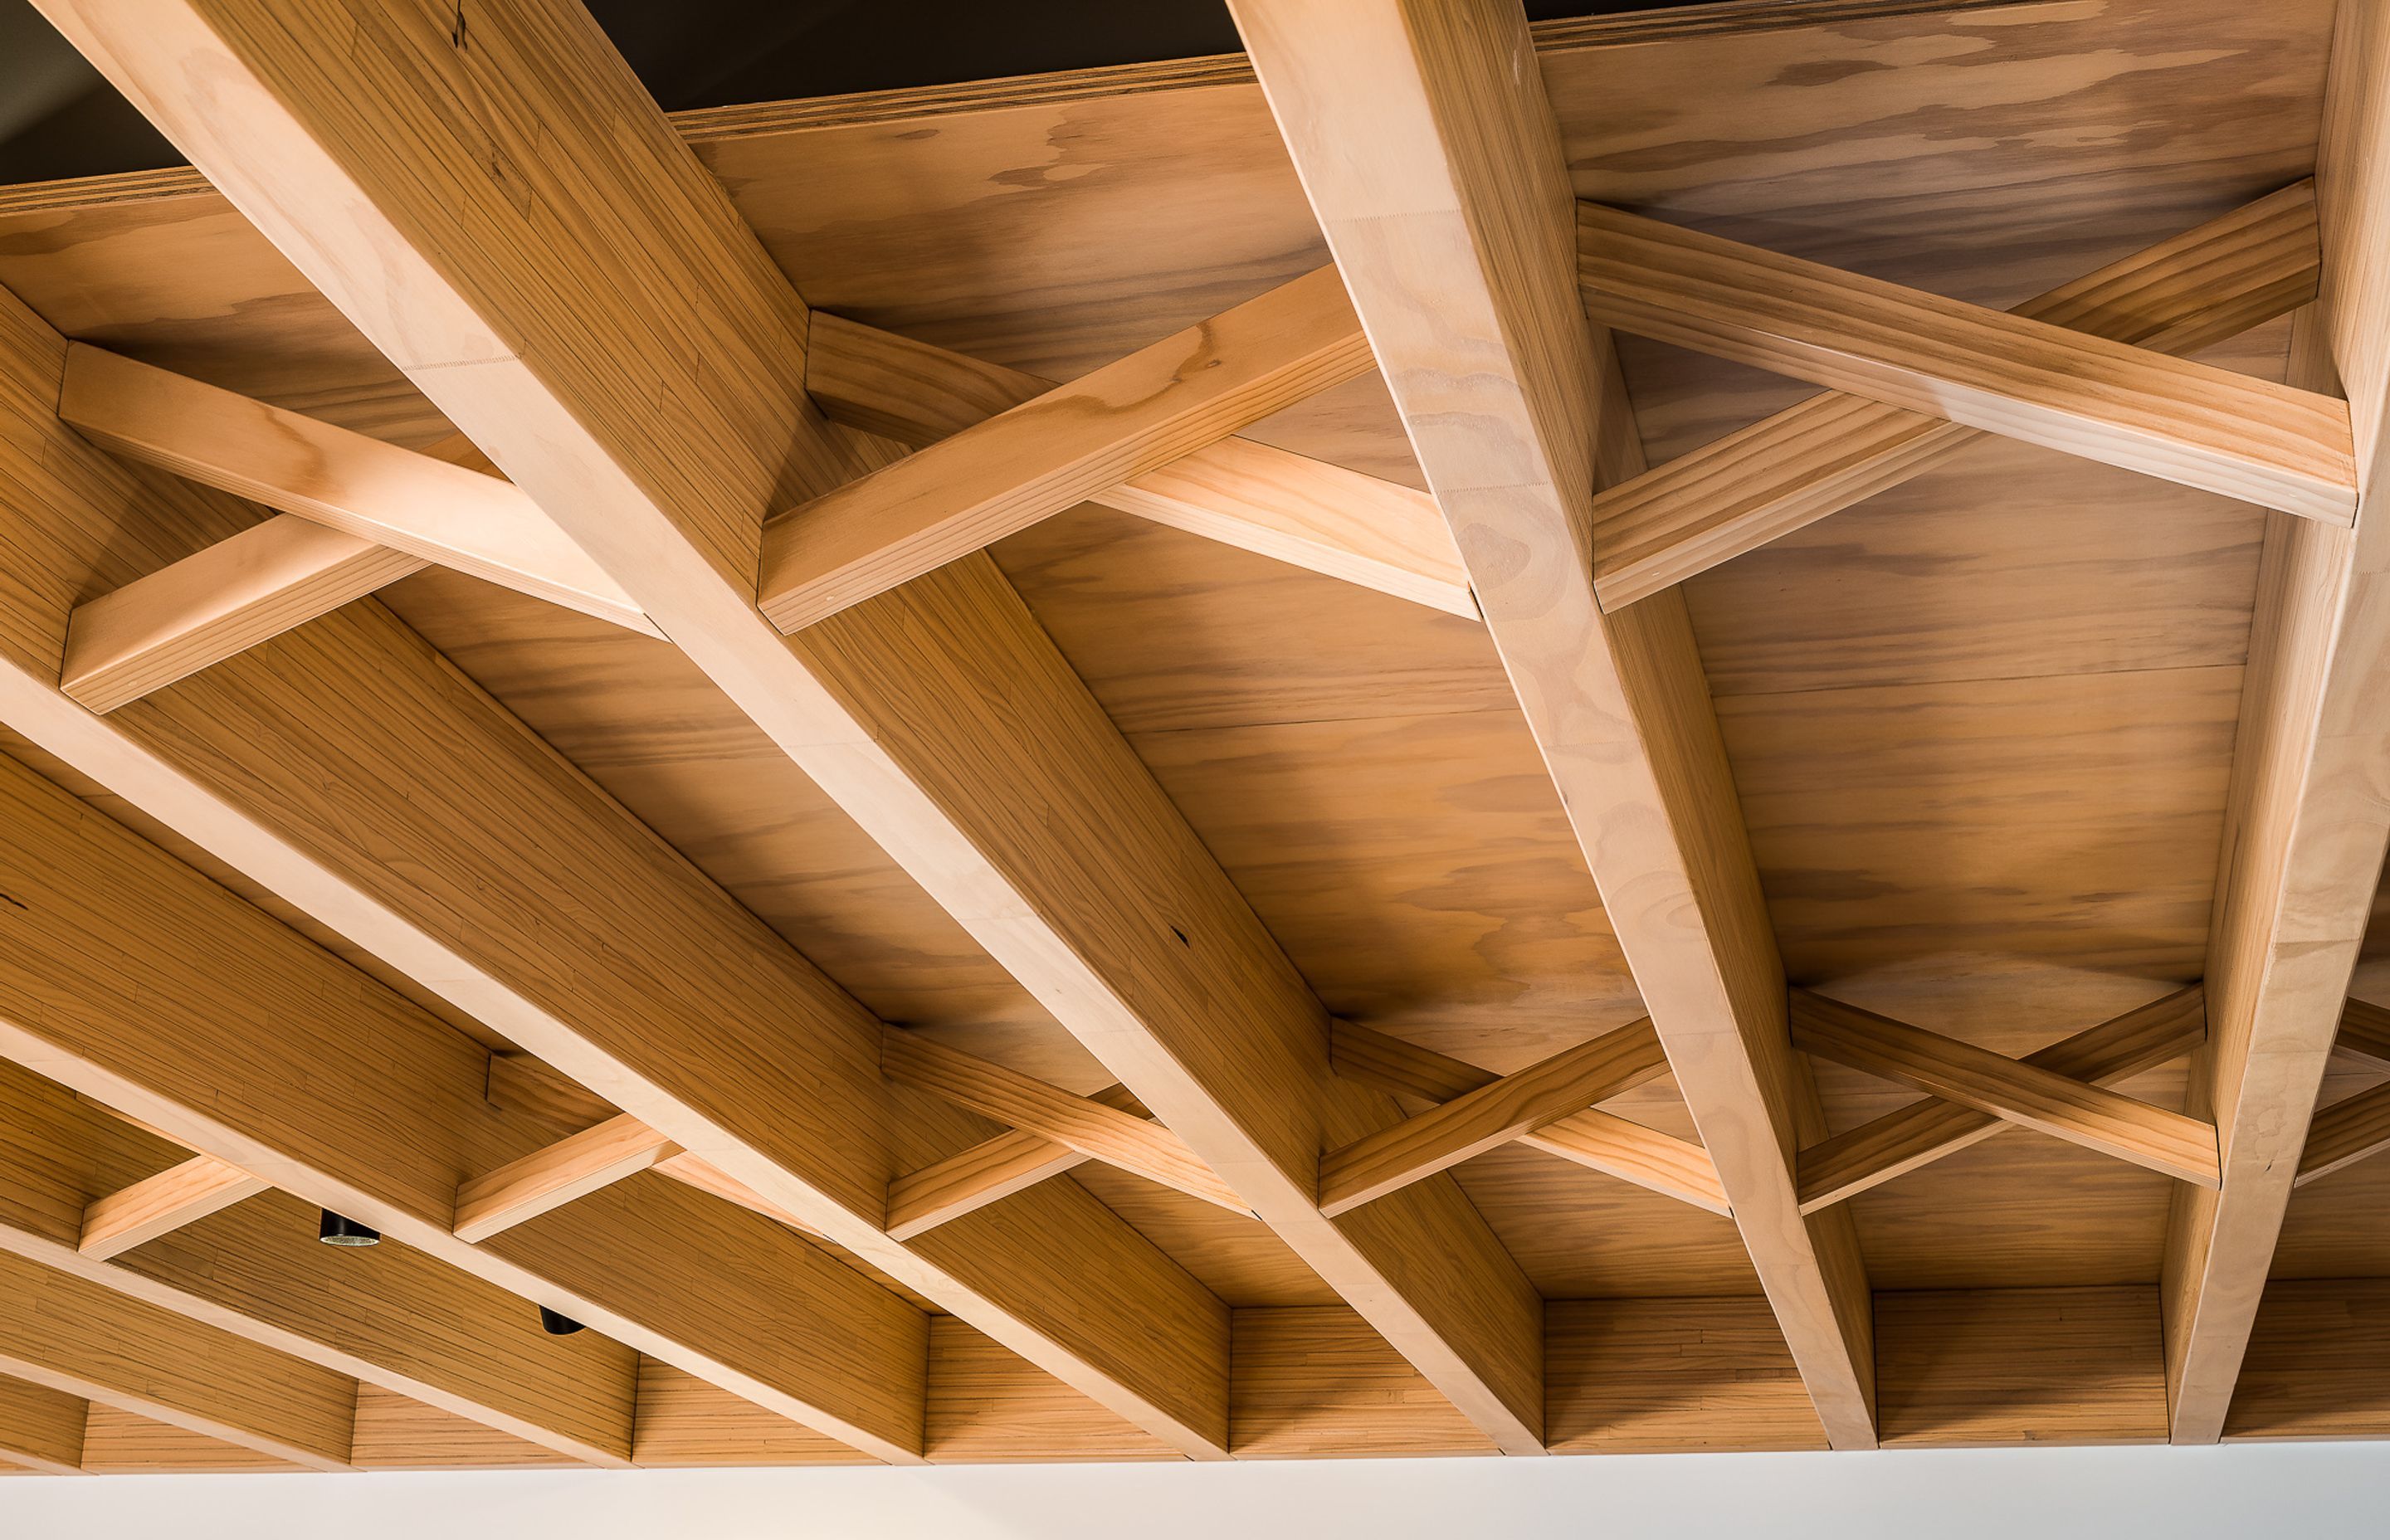 LVL beams have been stripped right back and a cross-brace motif employed to showcase the inherent beauty of the timber.